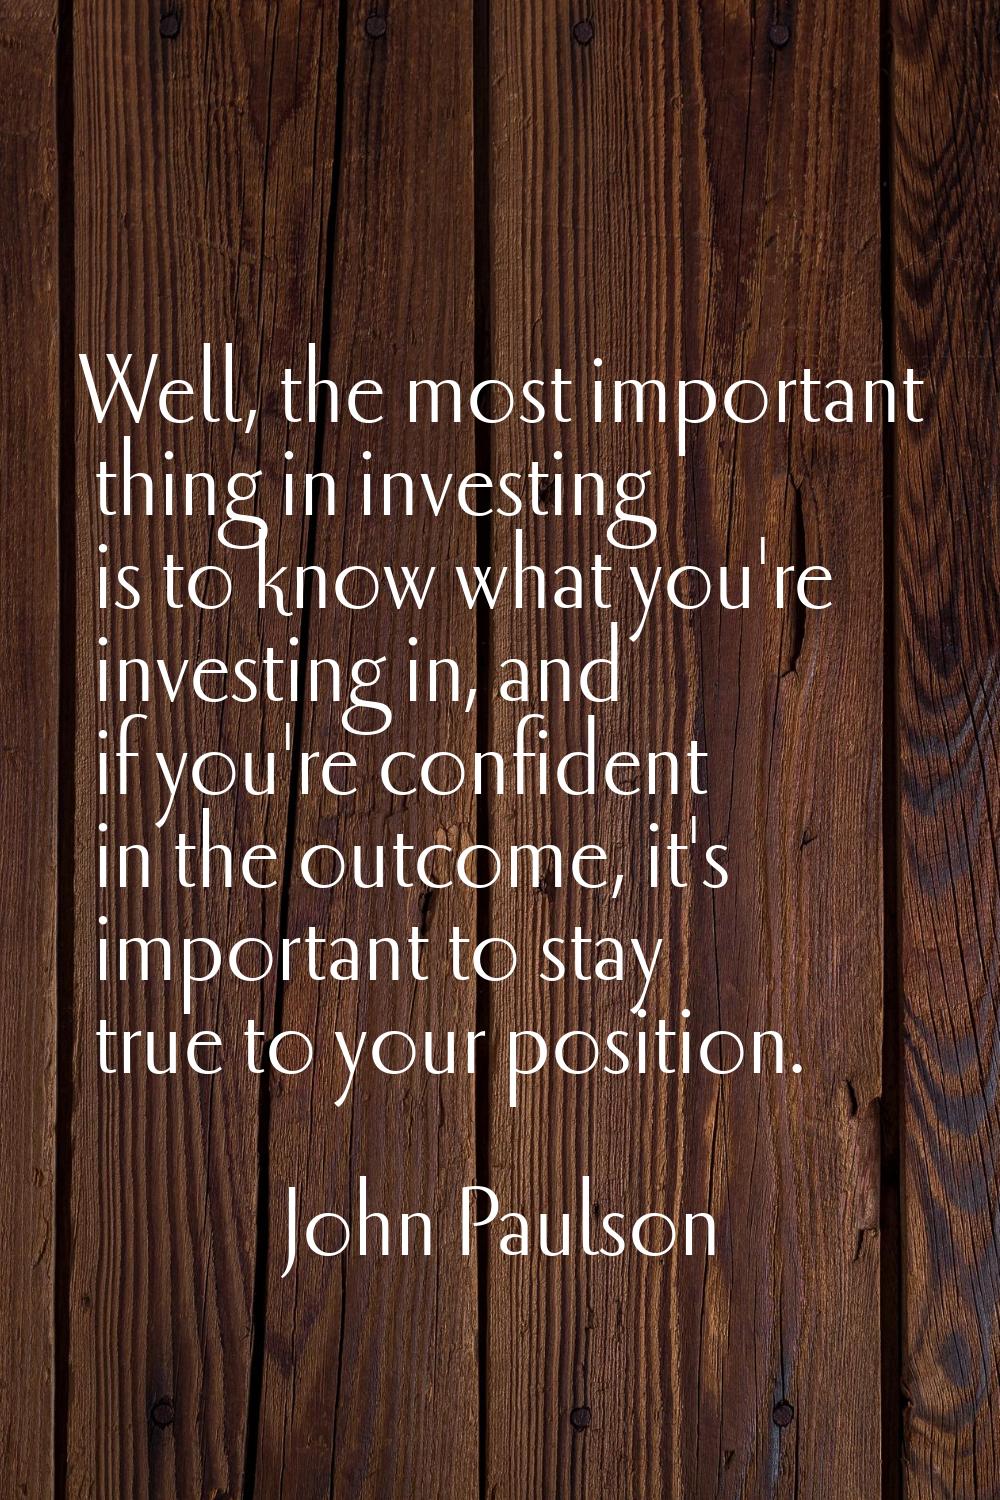 Well, the most important thing in investing is to know what you're investing in, and if you're conf